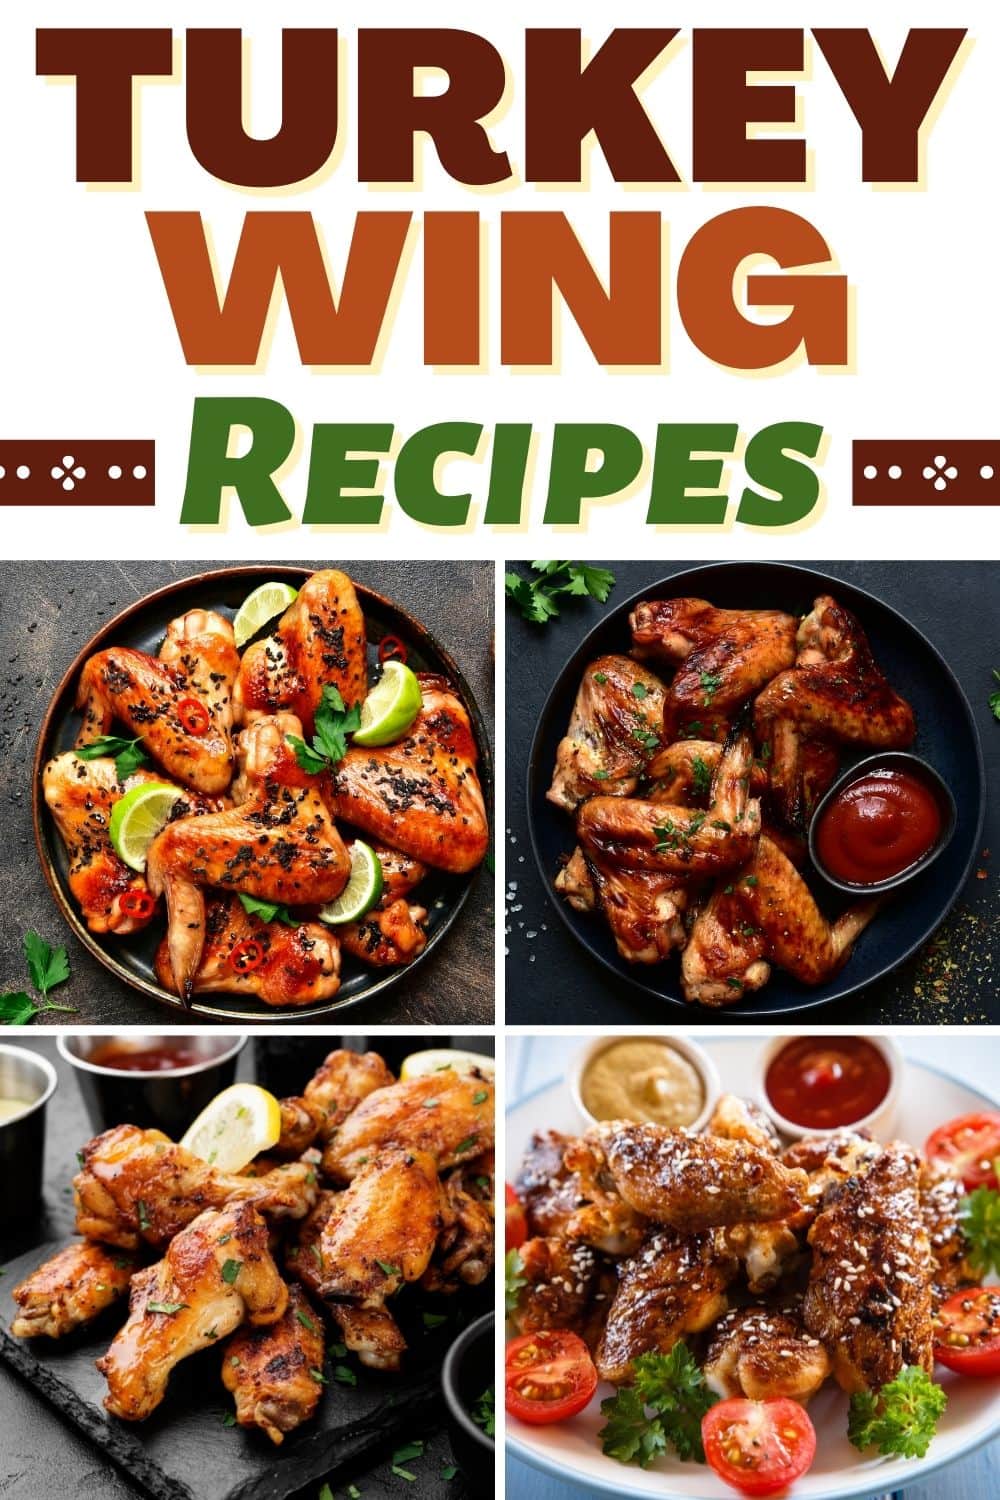 10 Best Turkey Wing Recipes For Your Next Party - Insanely Good